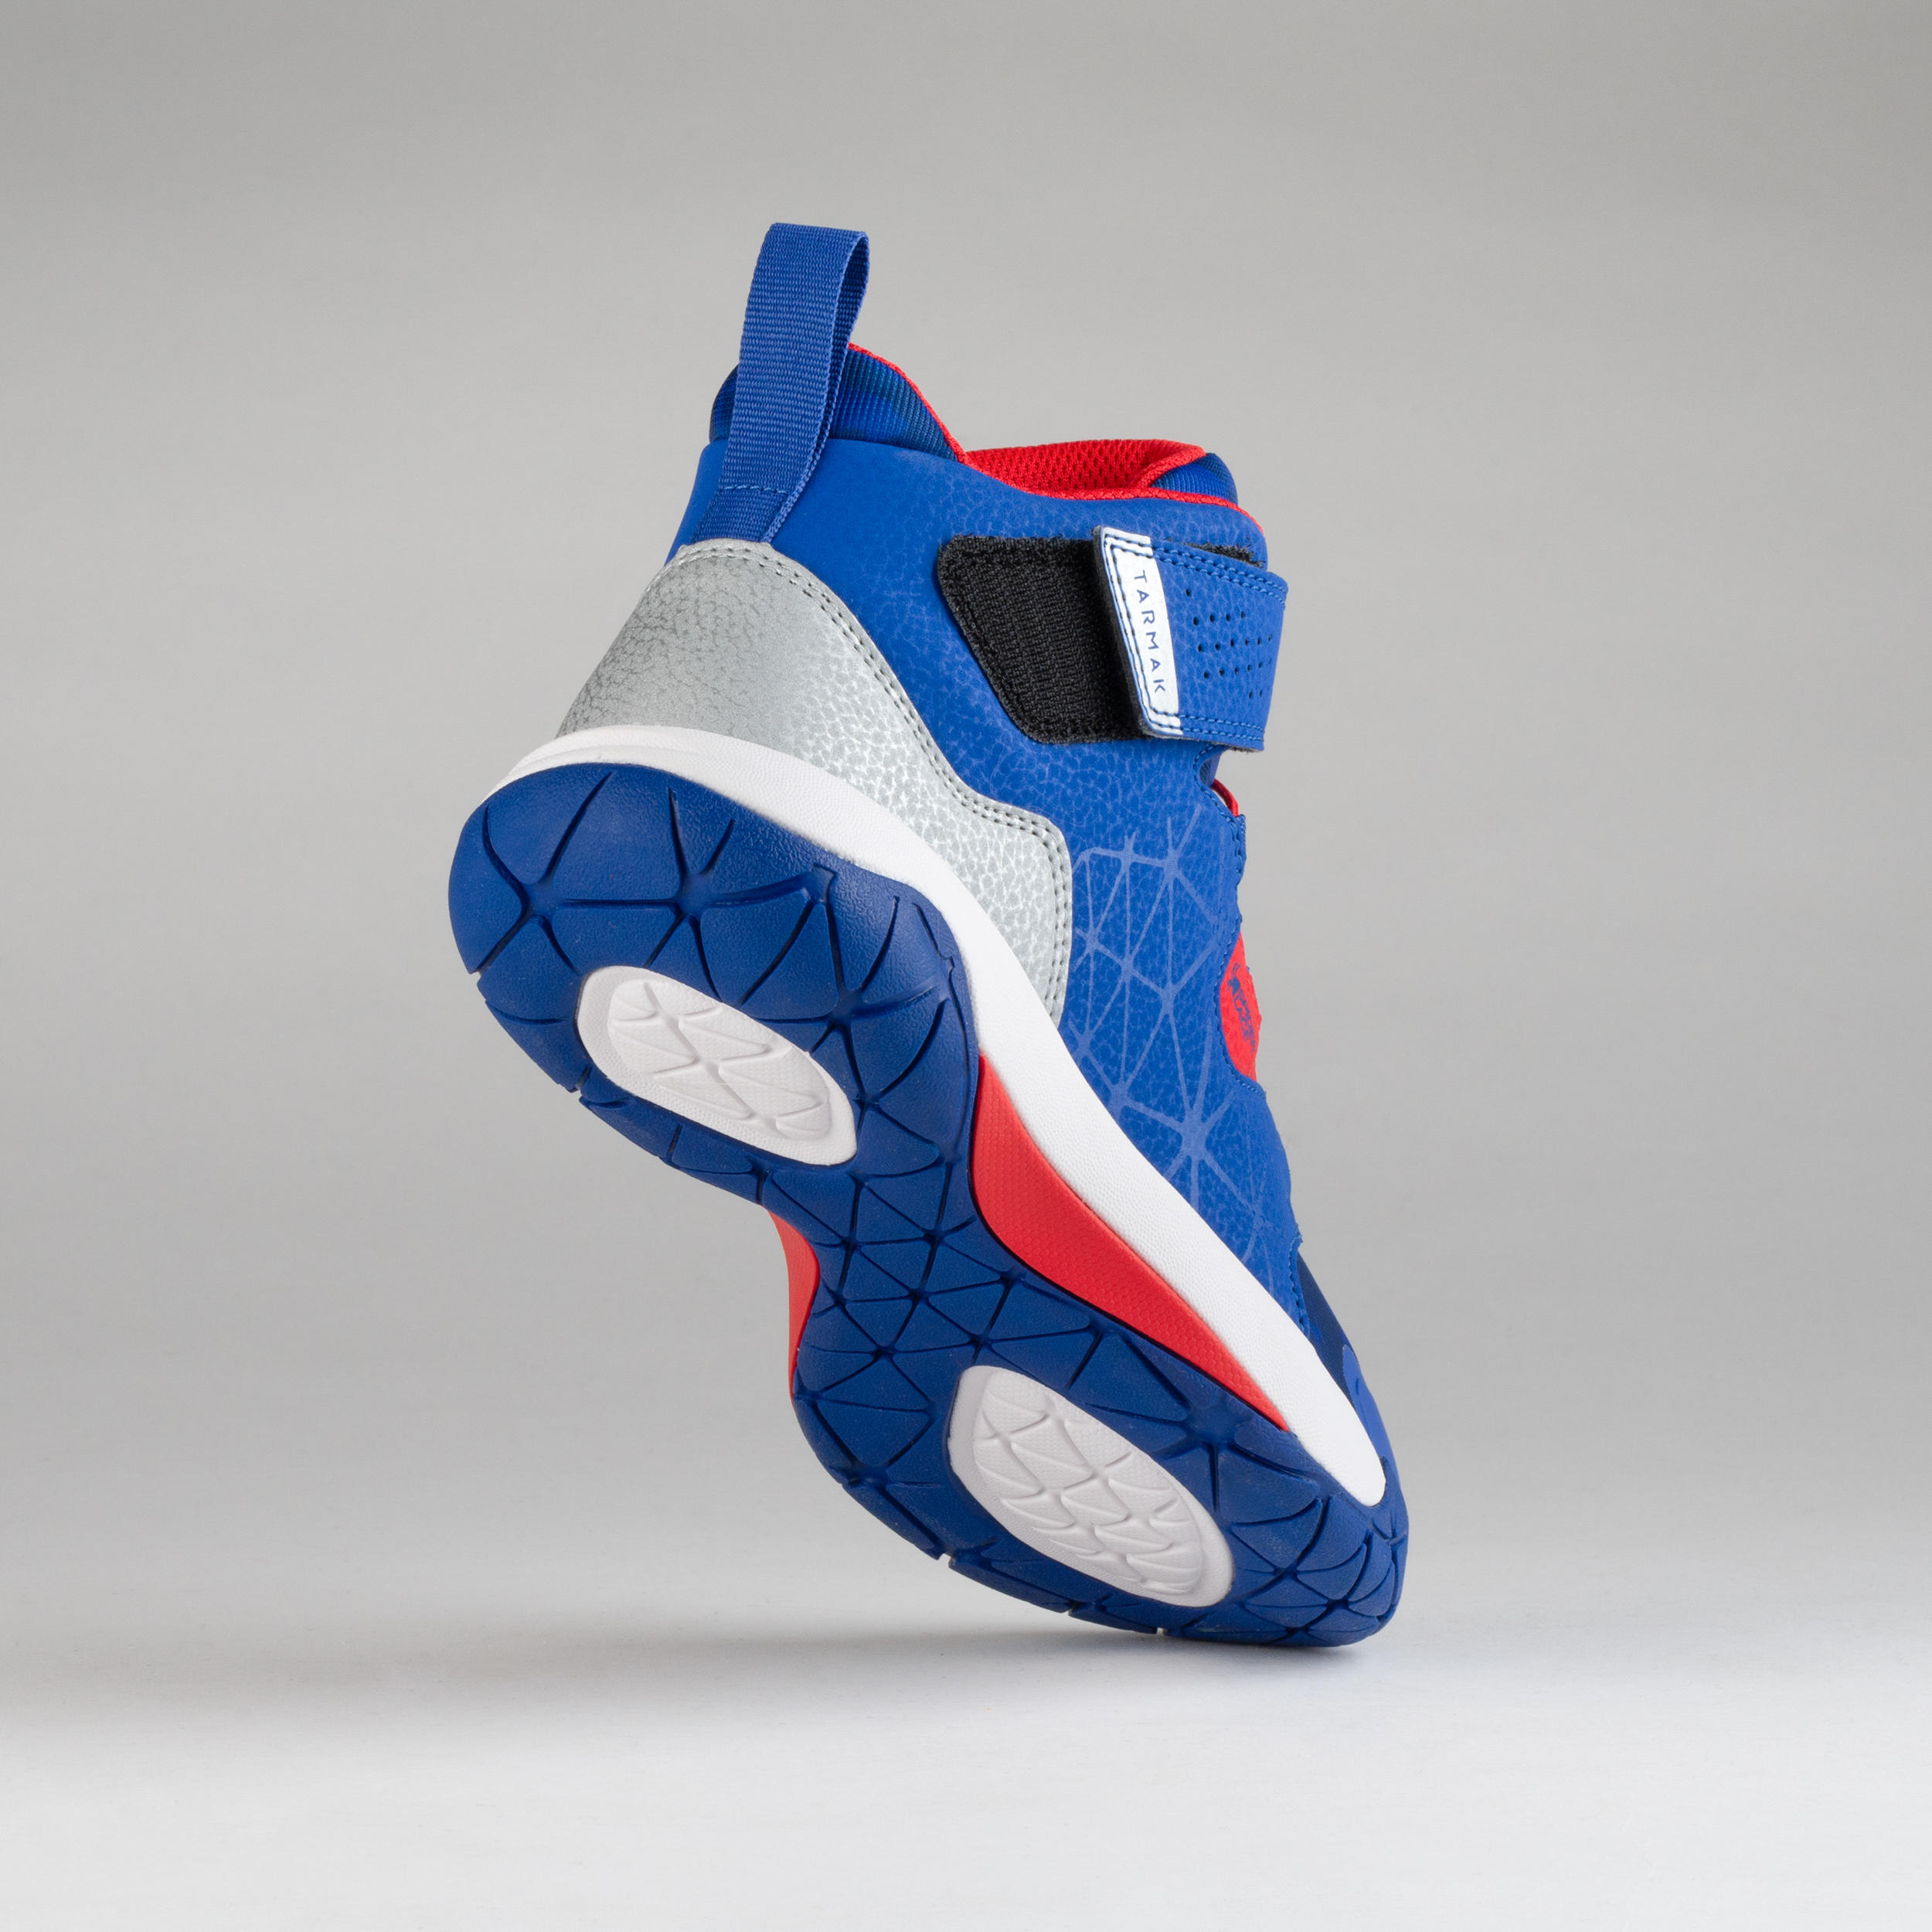 Boys'/Girls' Intermediate Basketball Shoes - Blue/Red Spider Lace 3/9